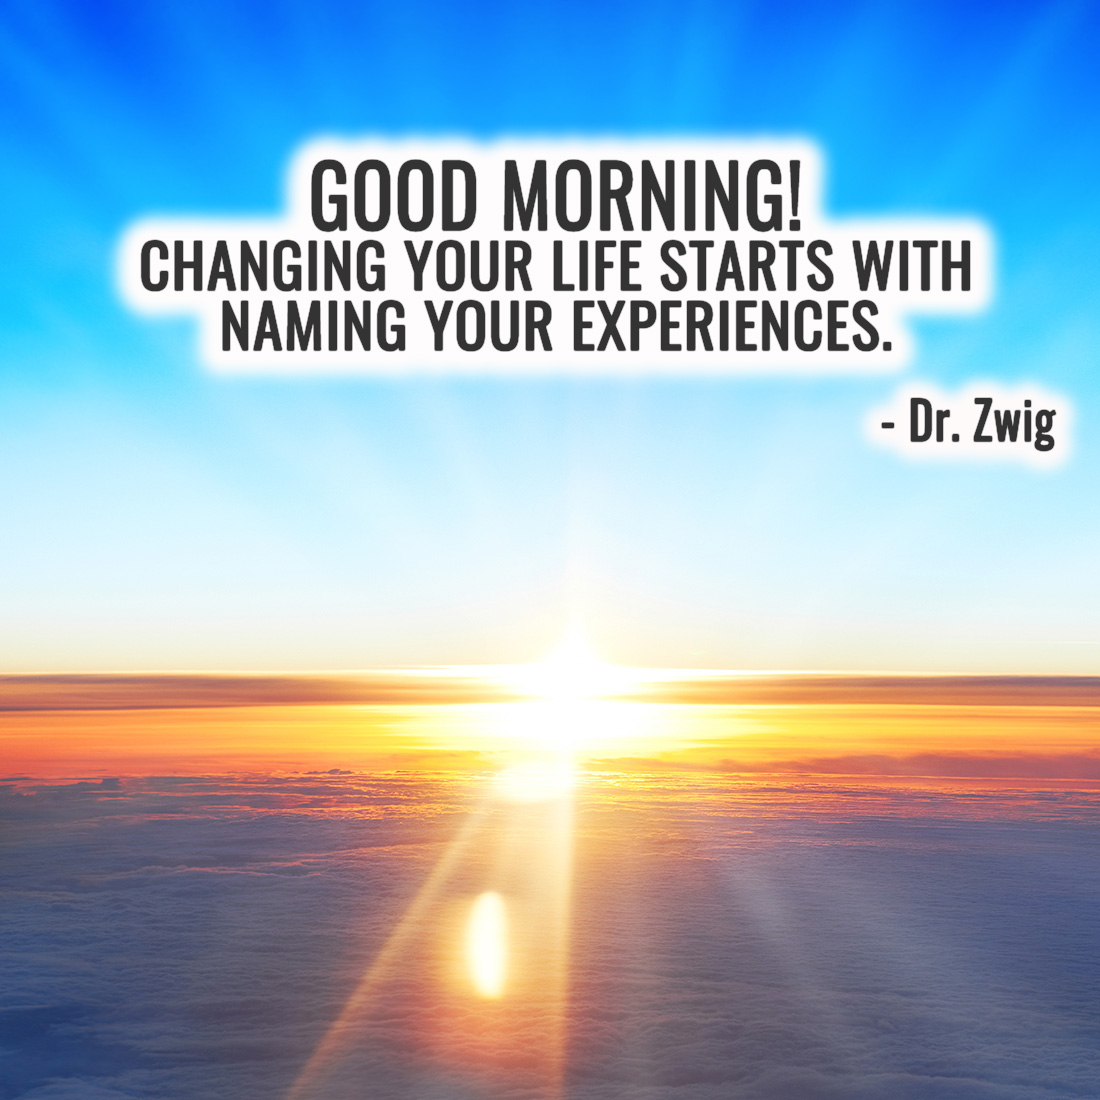 Changing your life starts with naming your experiences.